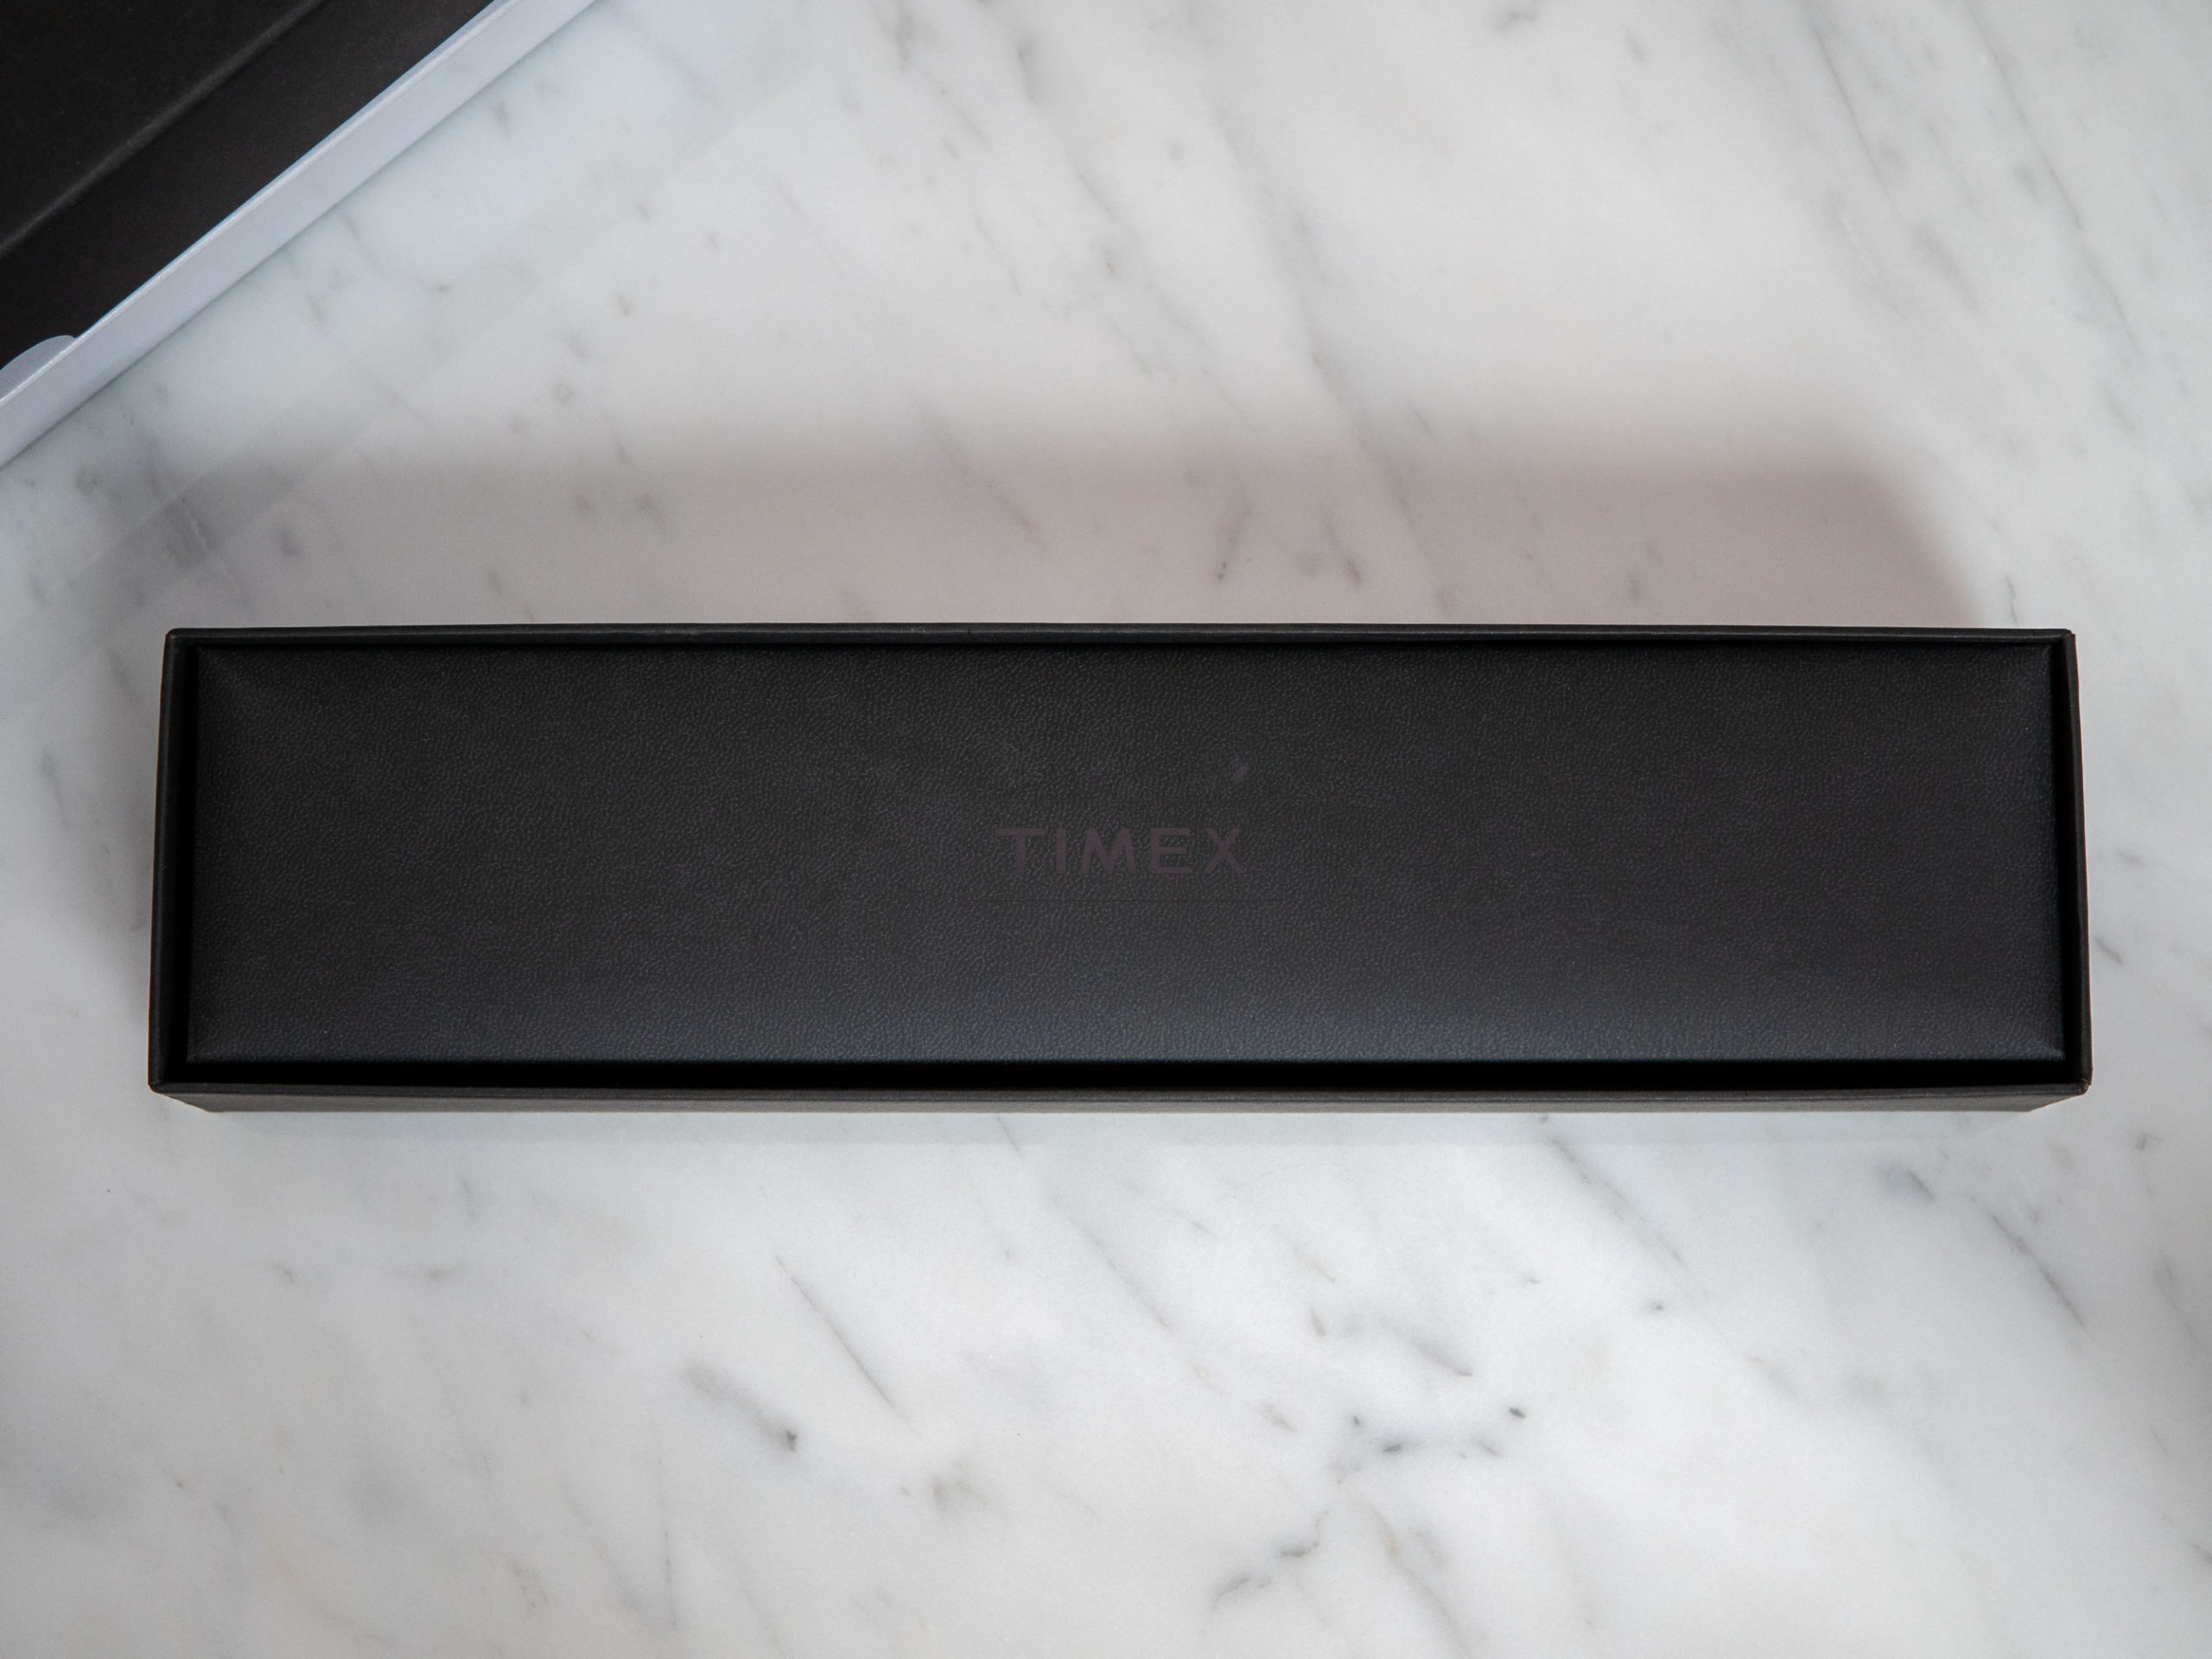 Timex Marlin unboxing 3